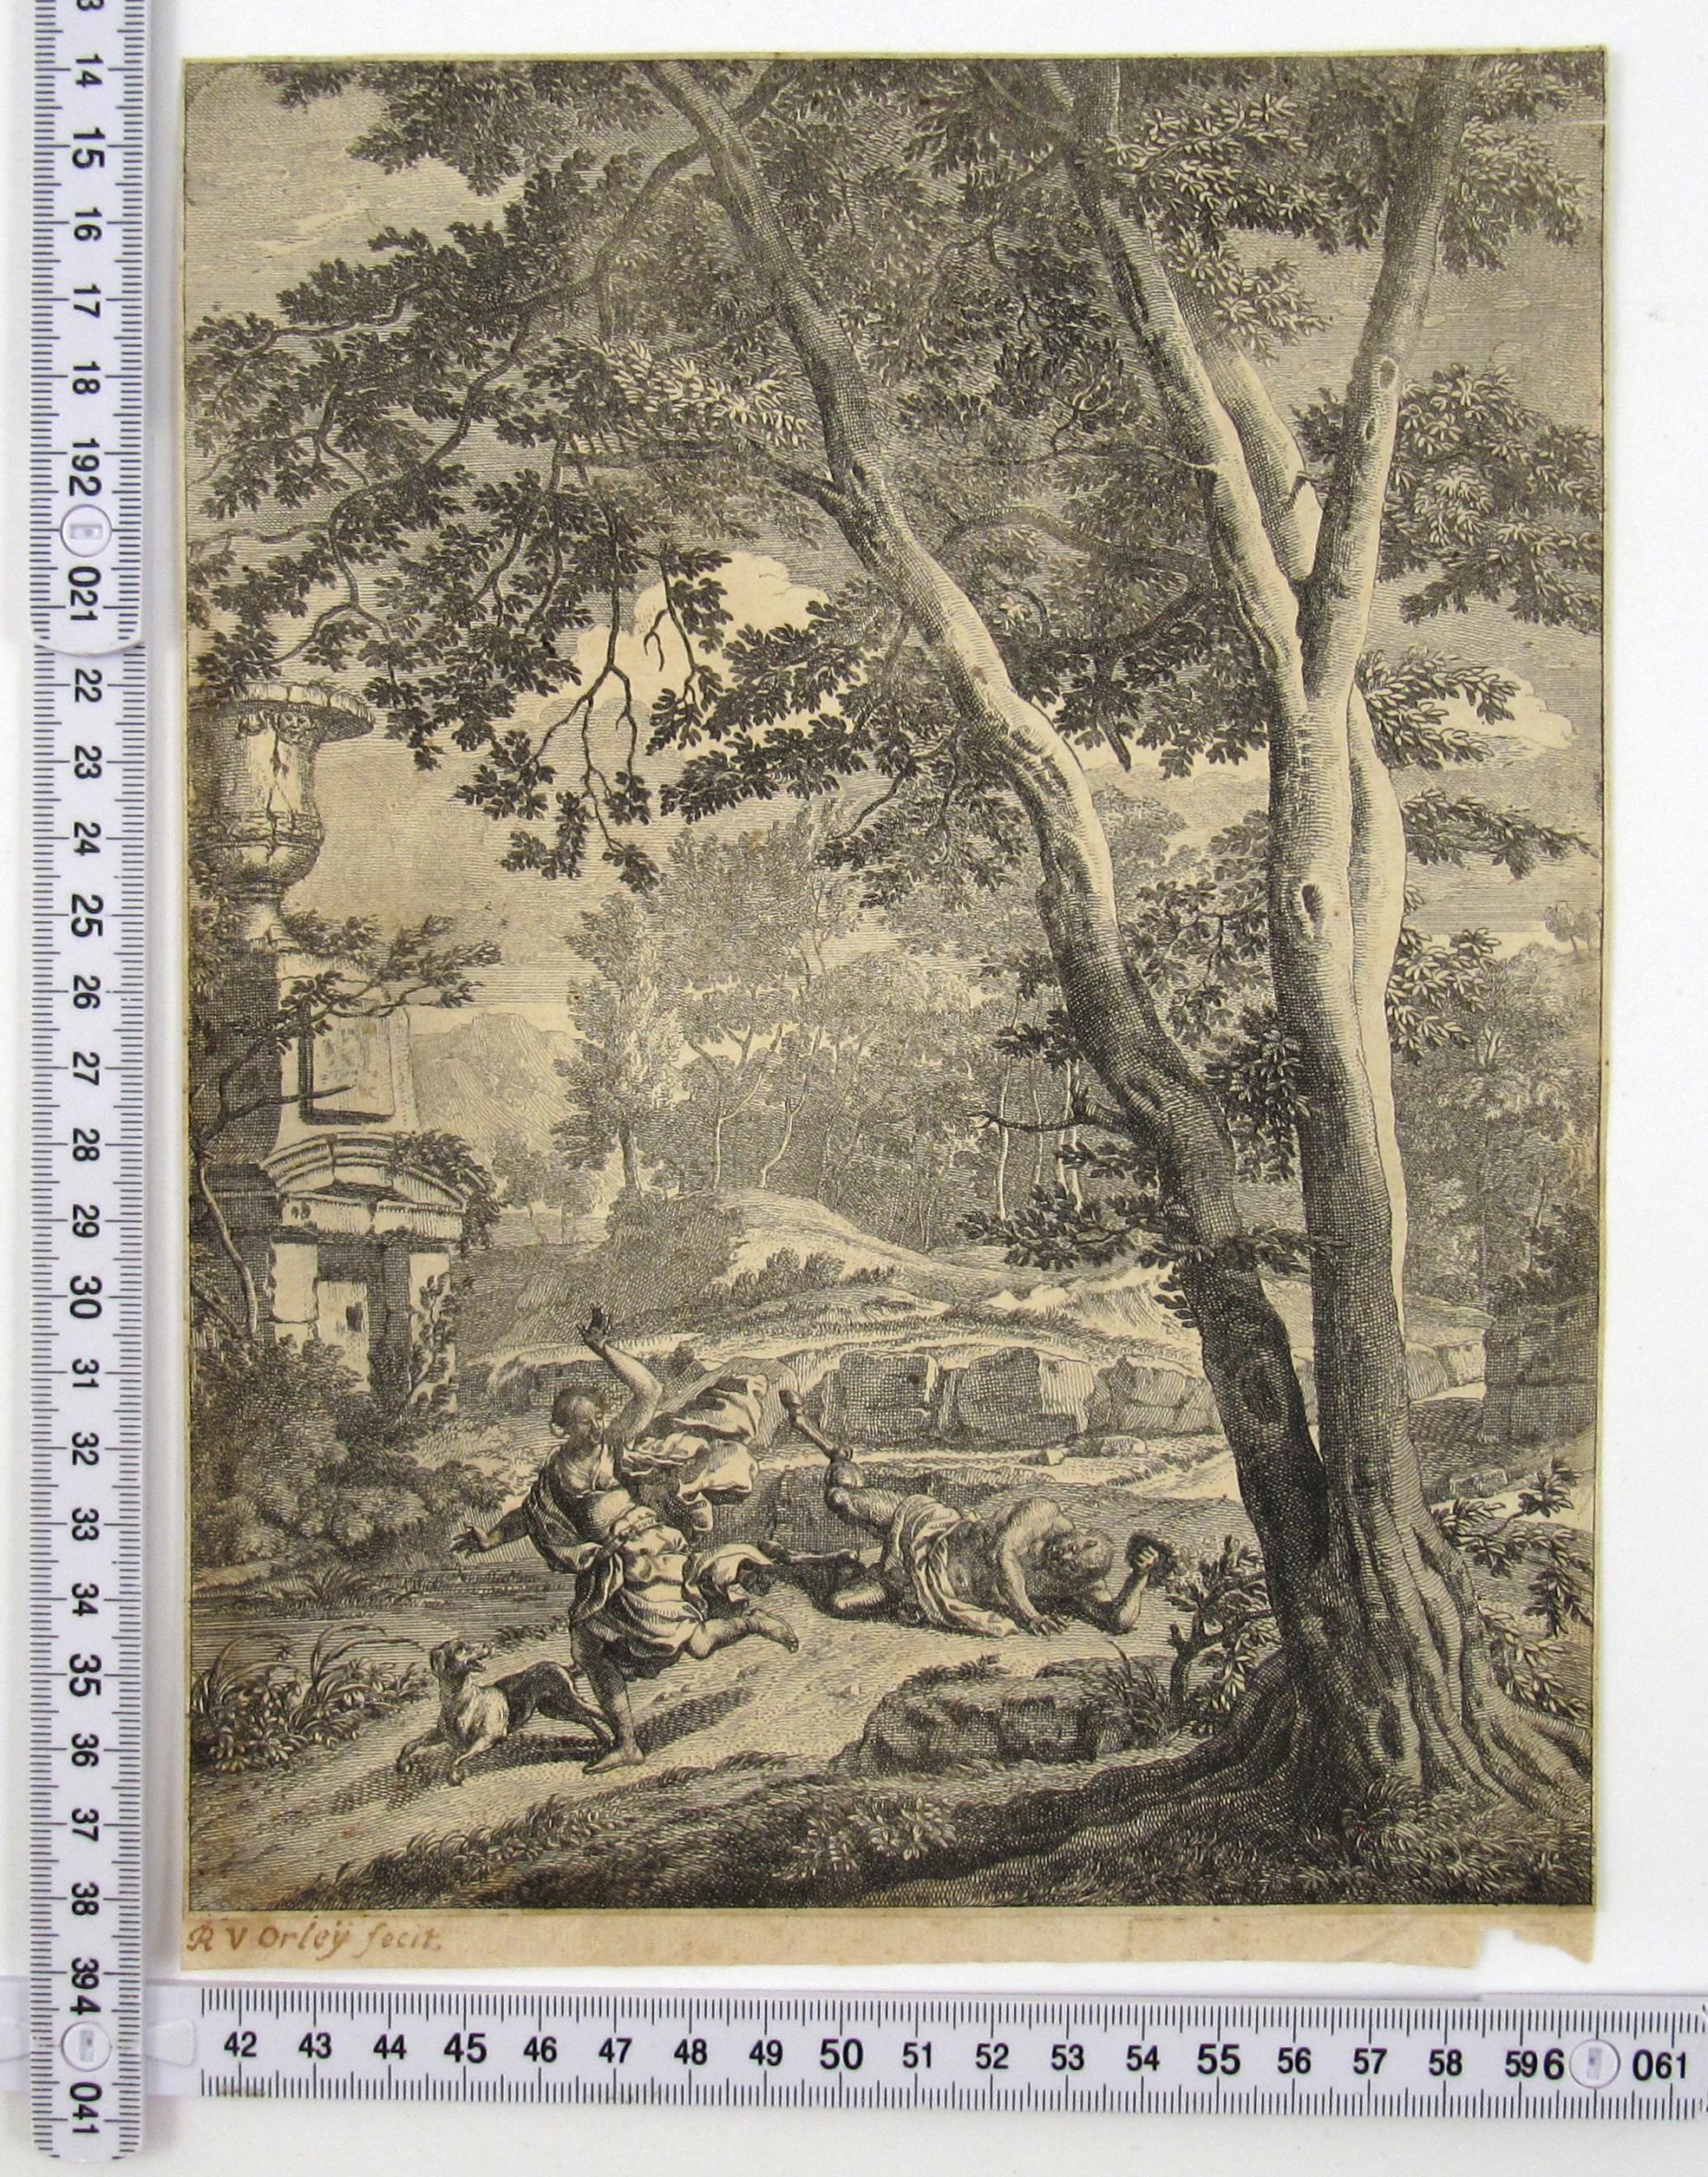 Corsica on the Run from the lustful Satyr - 17/18thC Engraving - Il pastor fido - Brown Figurative Print by Richard van Orley (II)